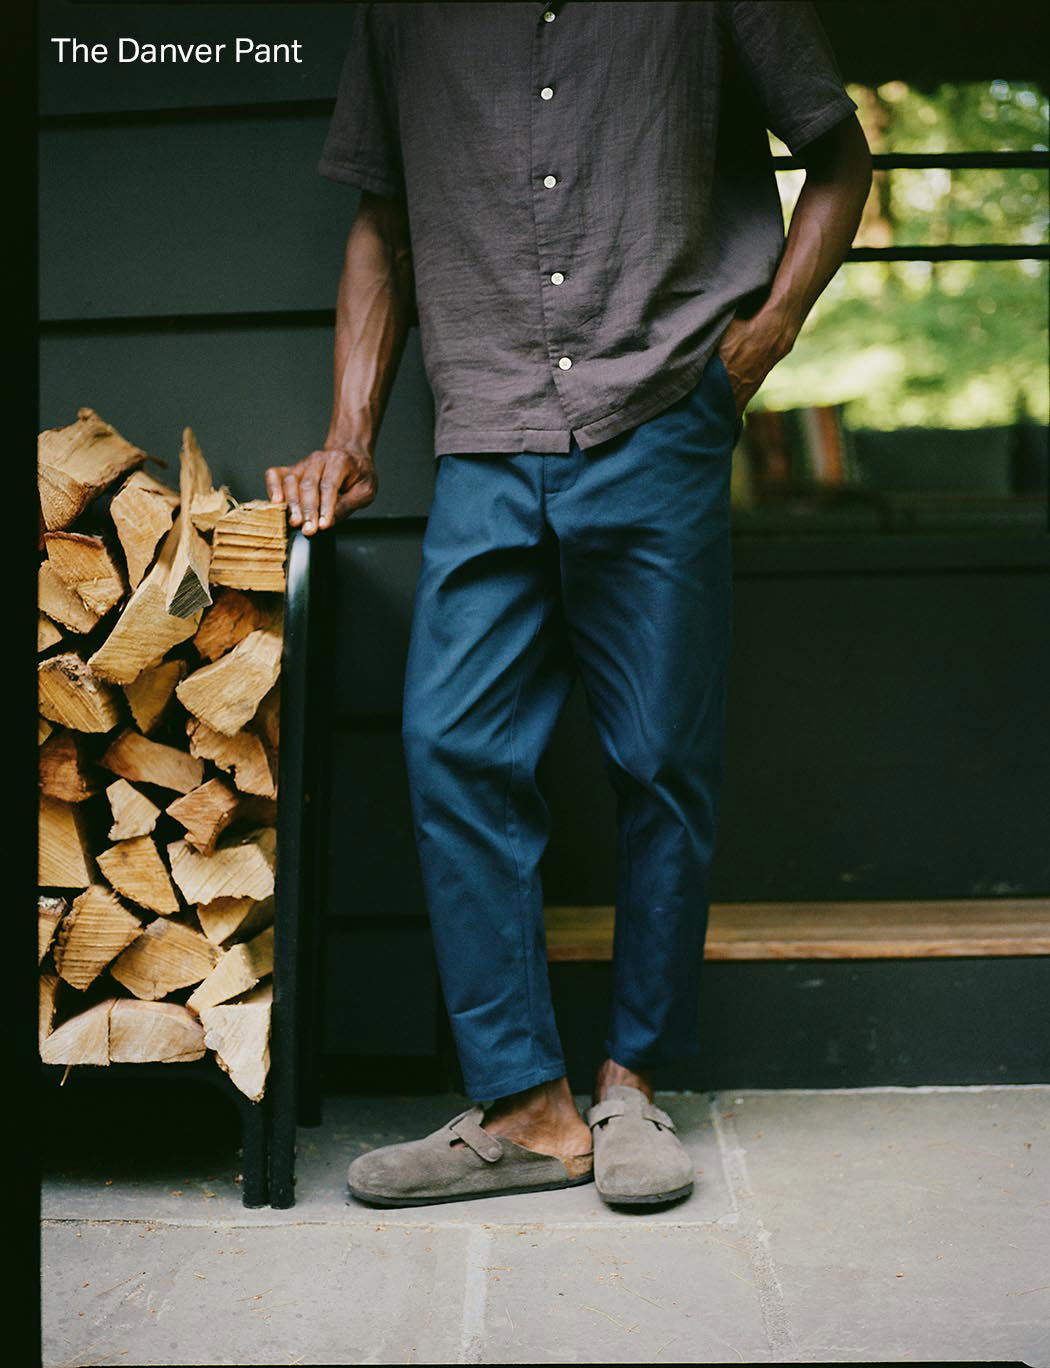 Steven Alan: Your daily driver: The Danver Pant | Milled